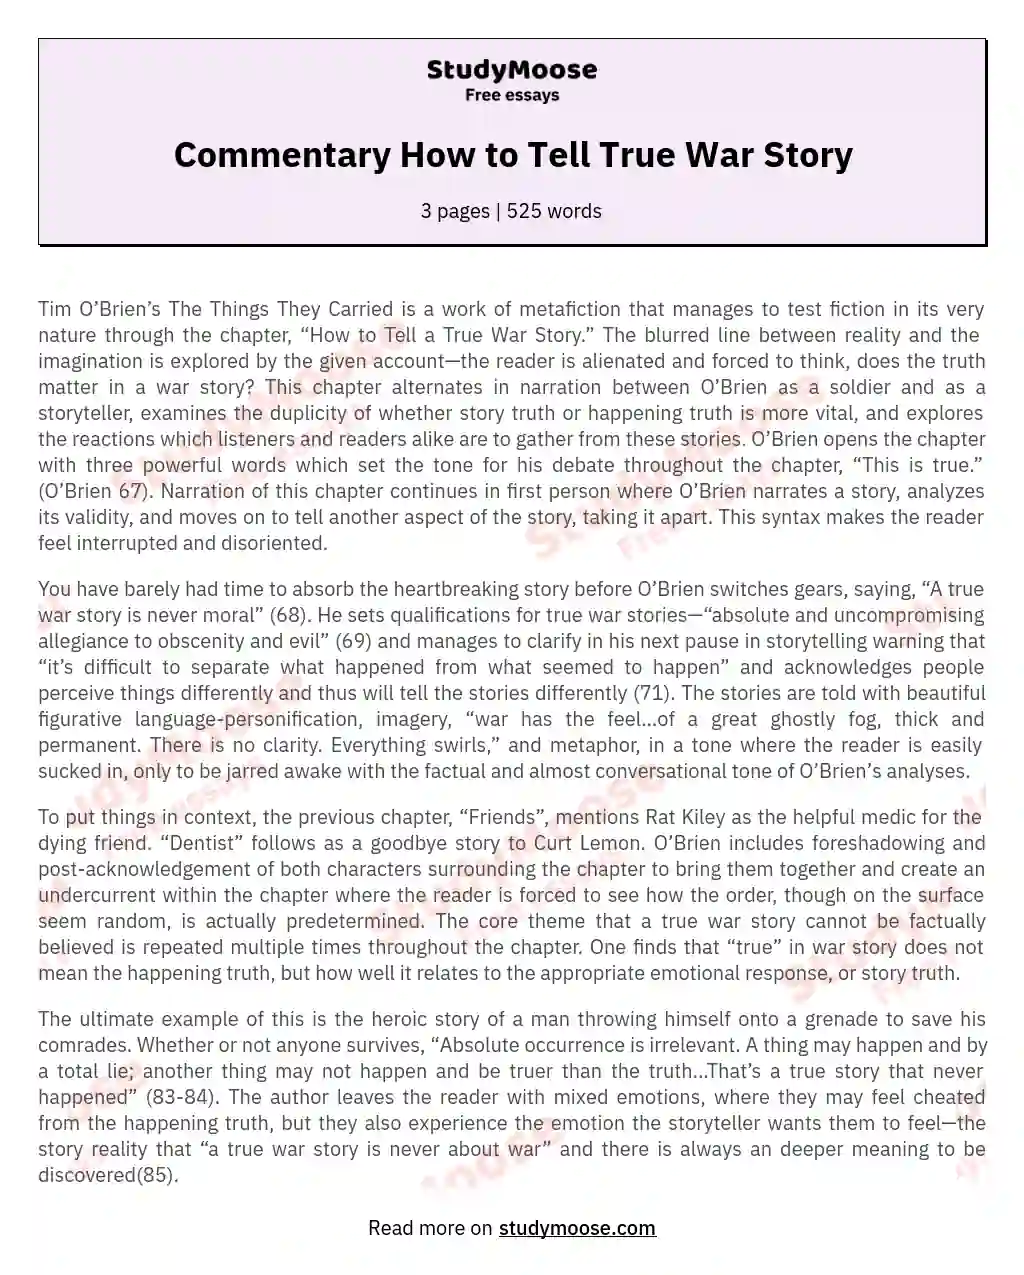 Commentary How to Tell True War Story essay